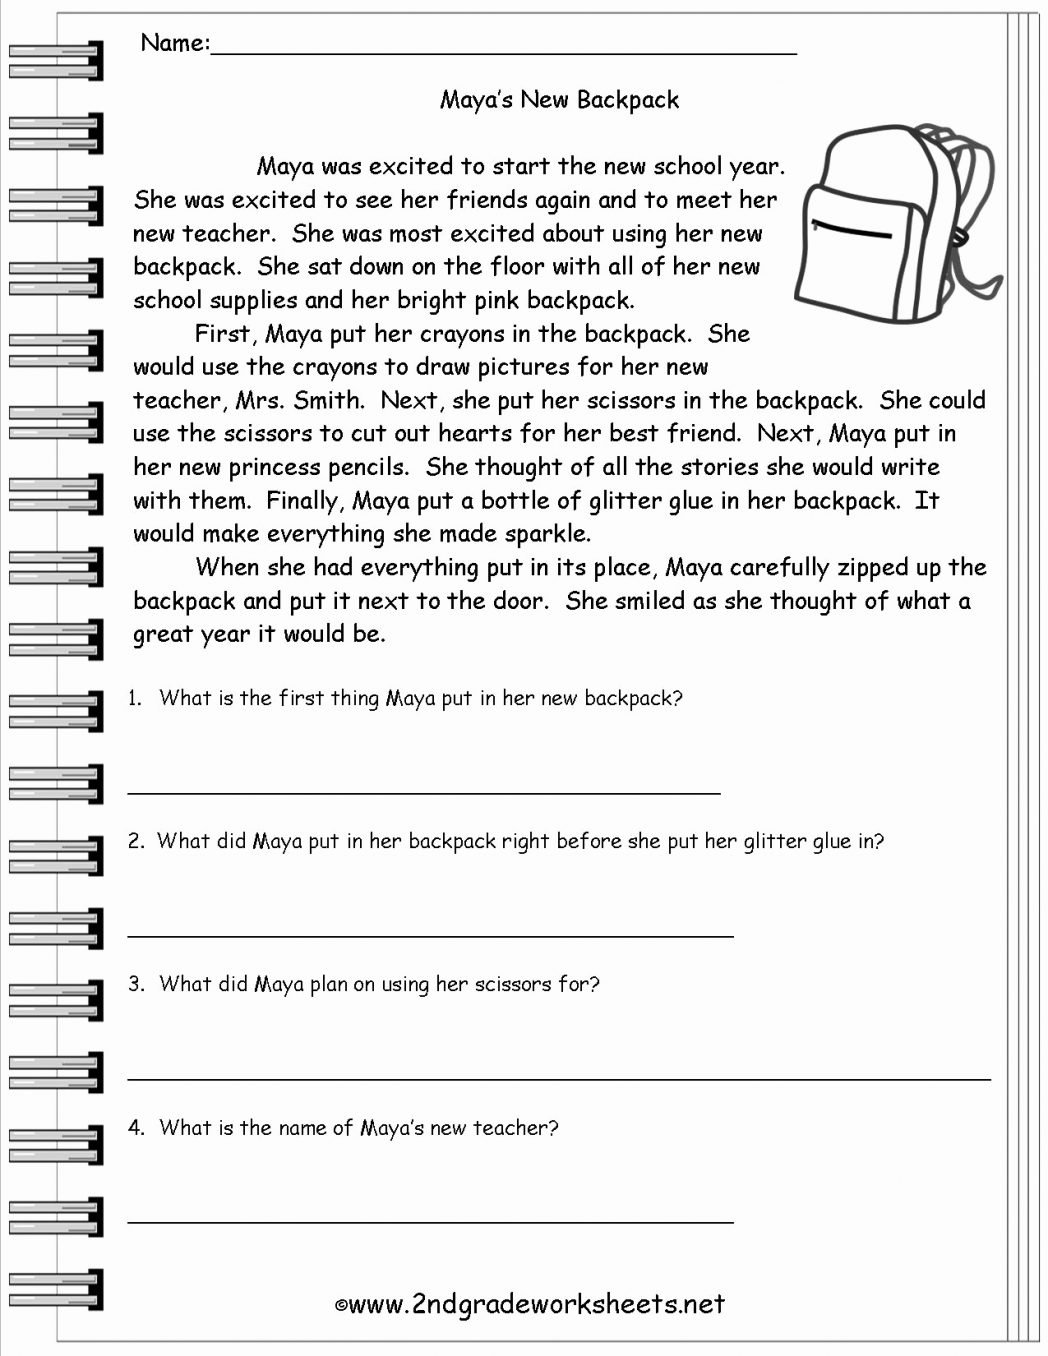 10-awesome-main-idea-worksheets-for-middle-school-2023